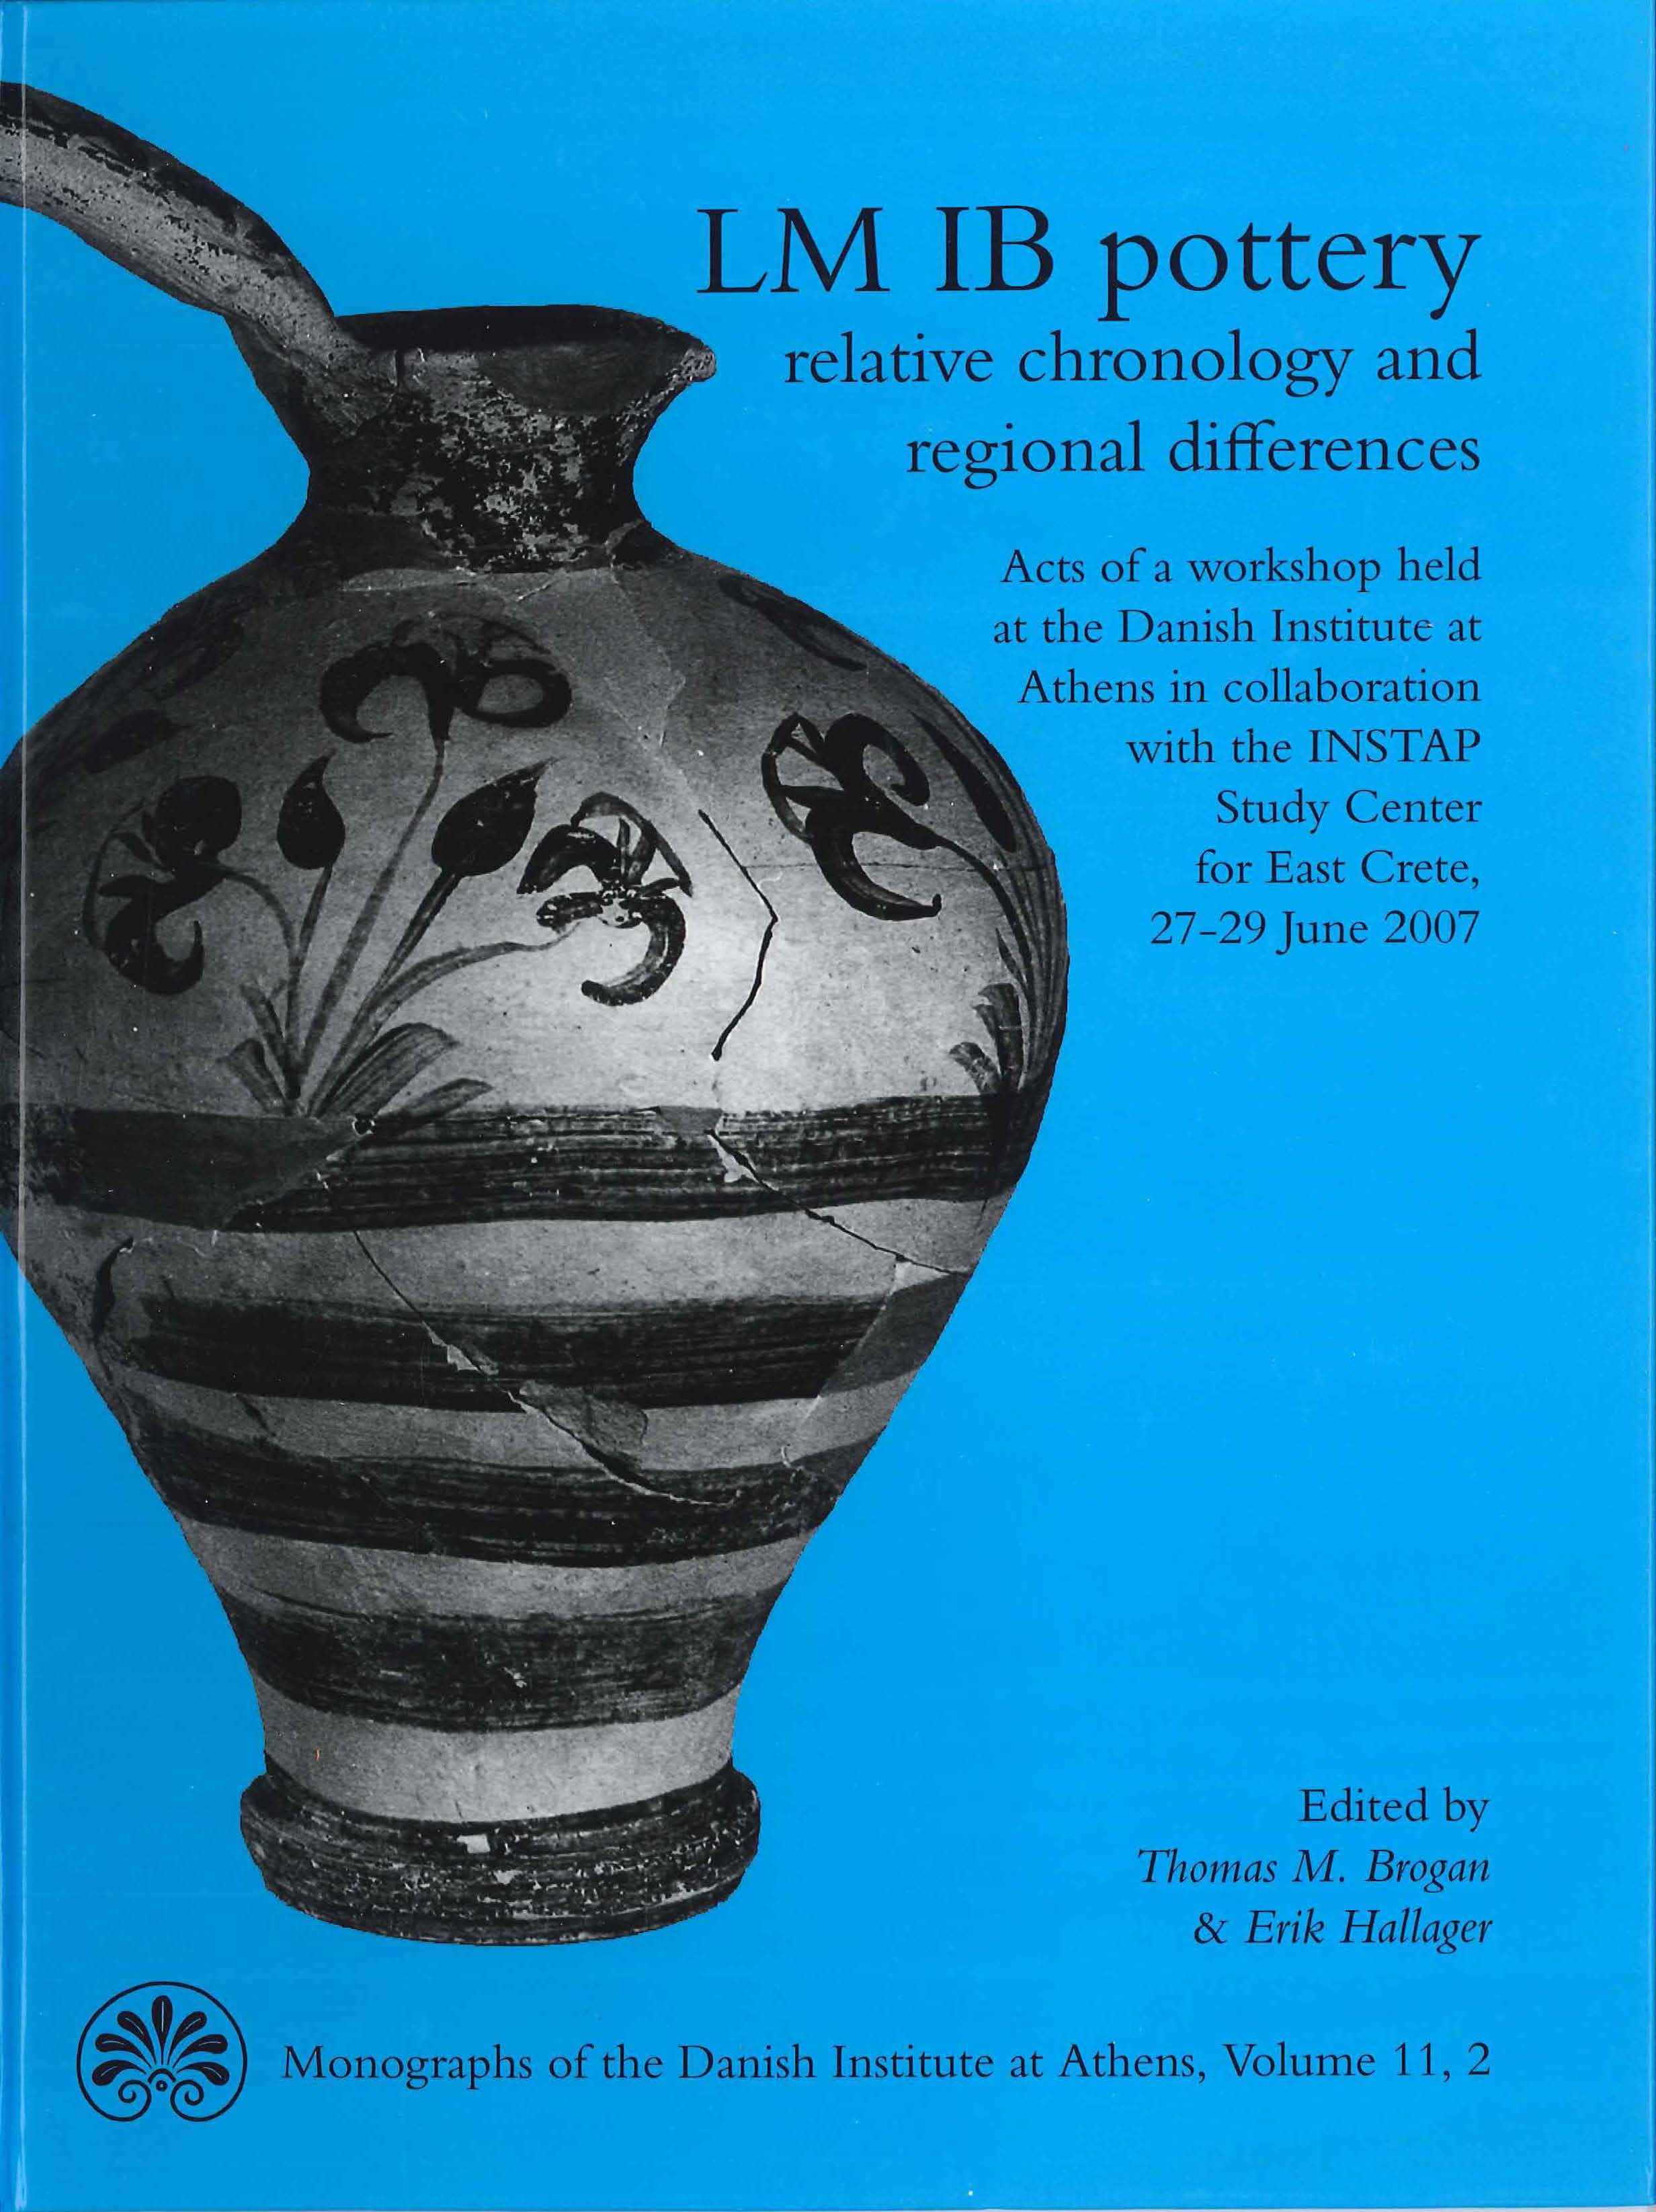 					View Vol. 11 No. 2 (2011): LM IB pottery - relative chronology and regional differences
				